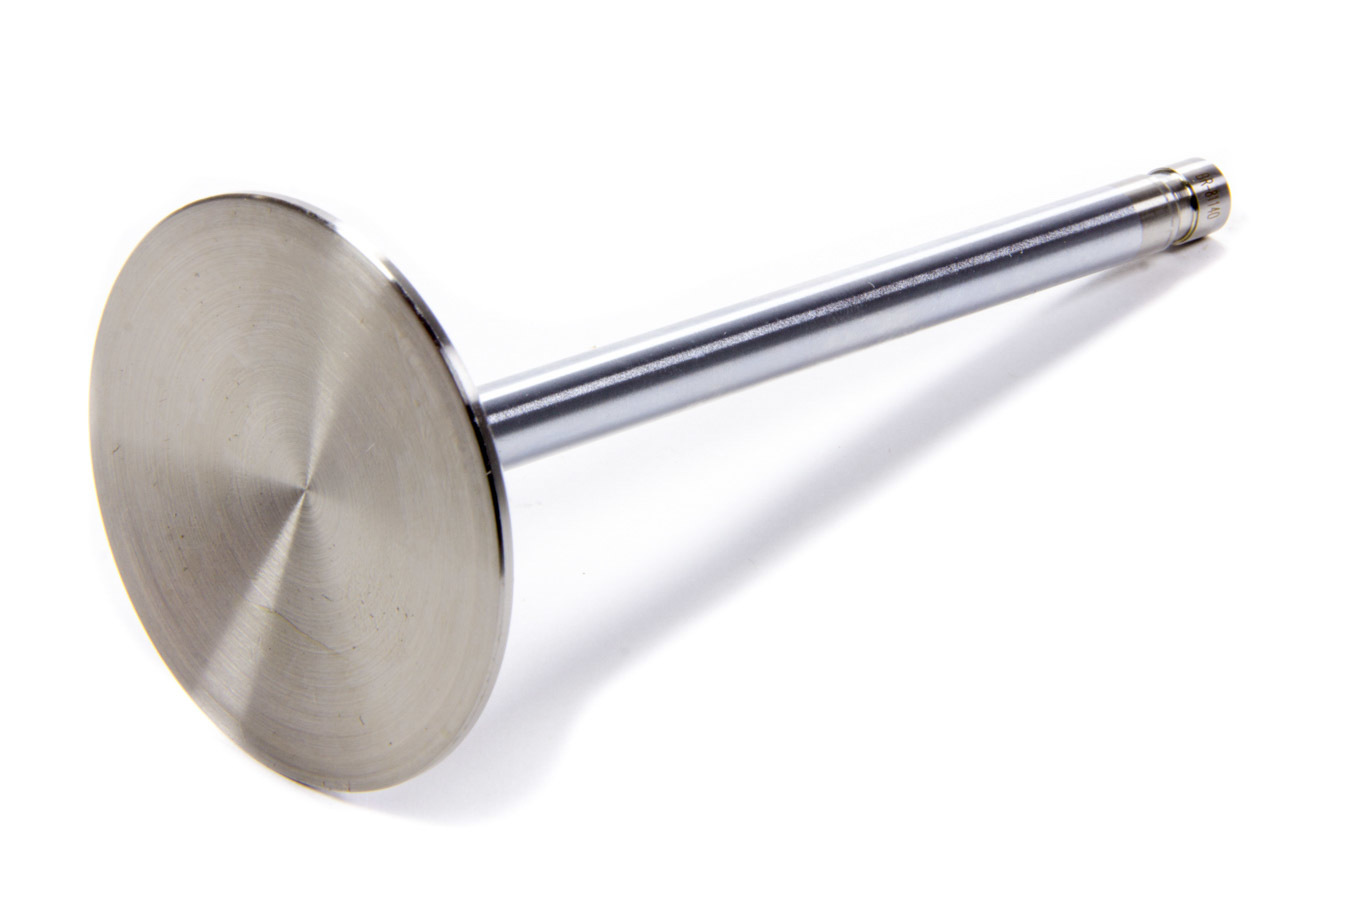 Brodix BR81351 Intake Valve, 2.350 in Head, 11/32 in Valve Stem, 5.568 in Long, Stainless, Big Block Chevy, Each